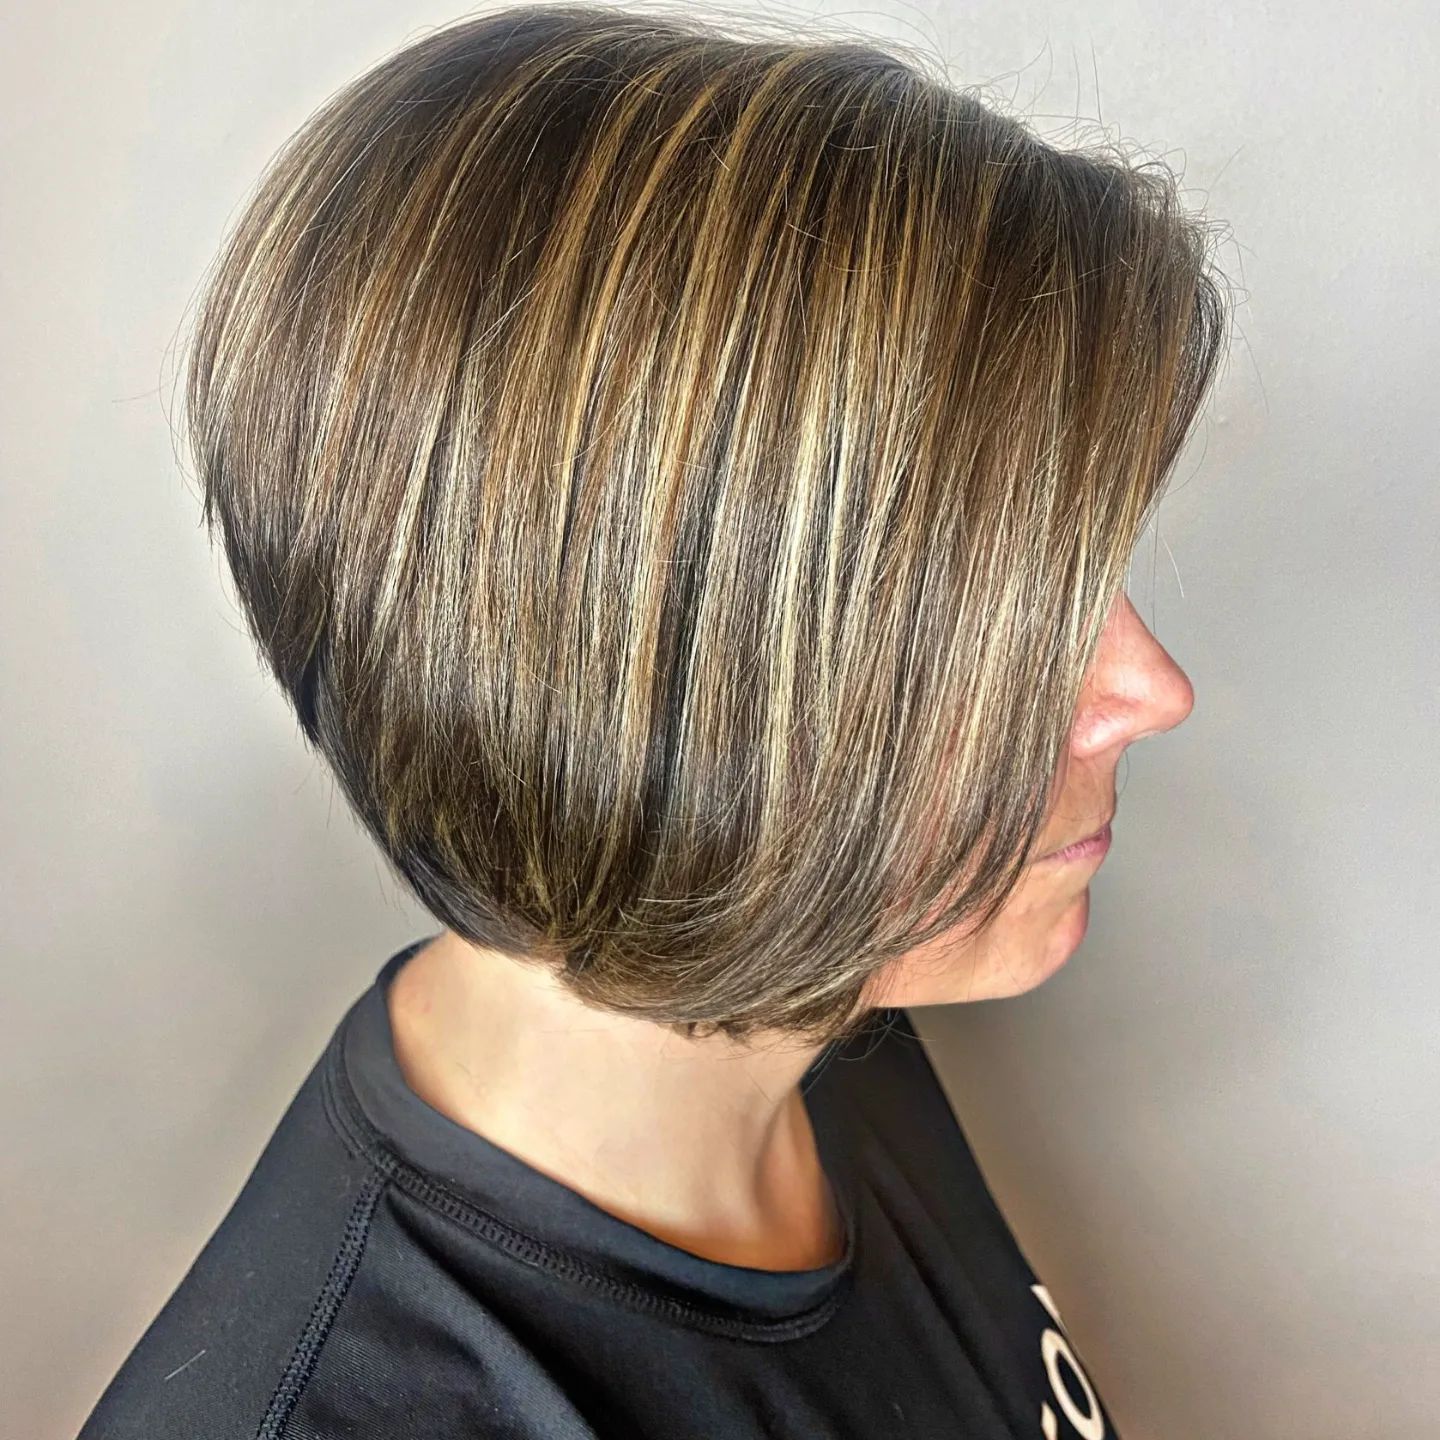 Stacked Bob 98 Long stacked bob | Medium length stacked bob | Pictures of stacked bob haircuts front and back Stacked Bob Hairstyles for Women